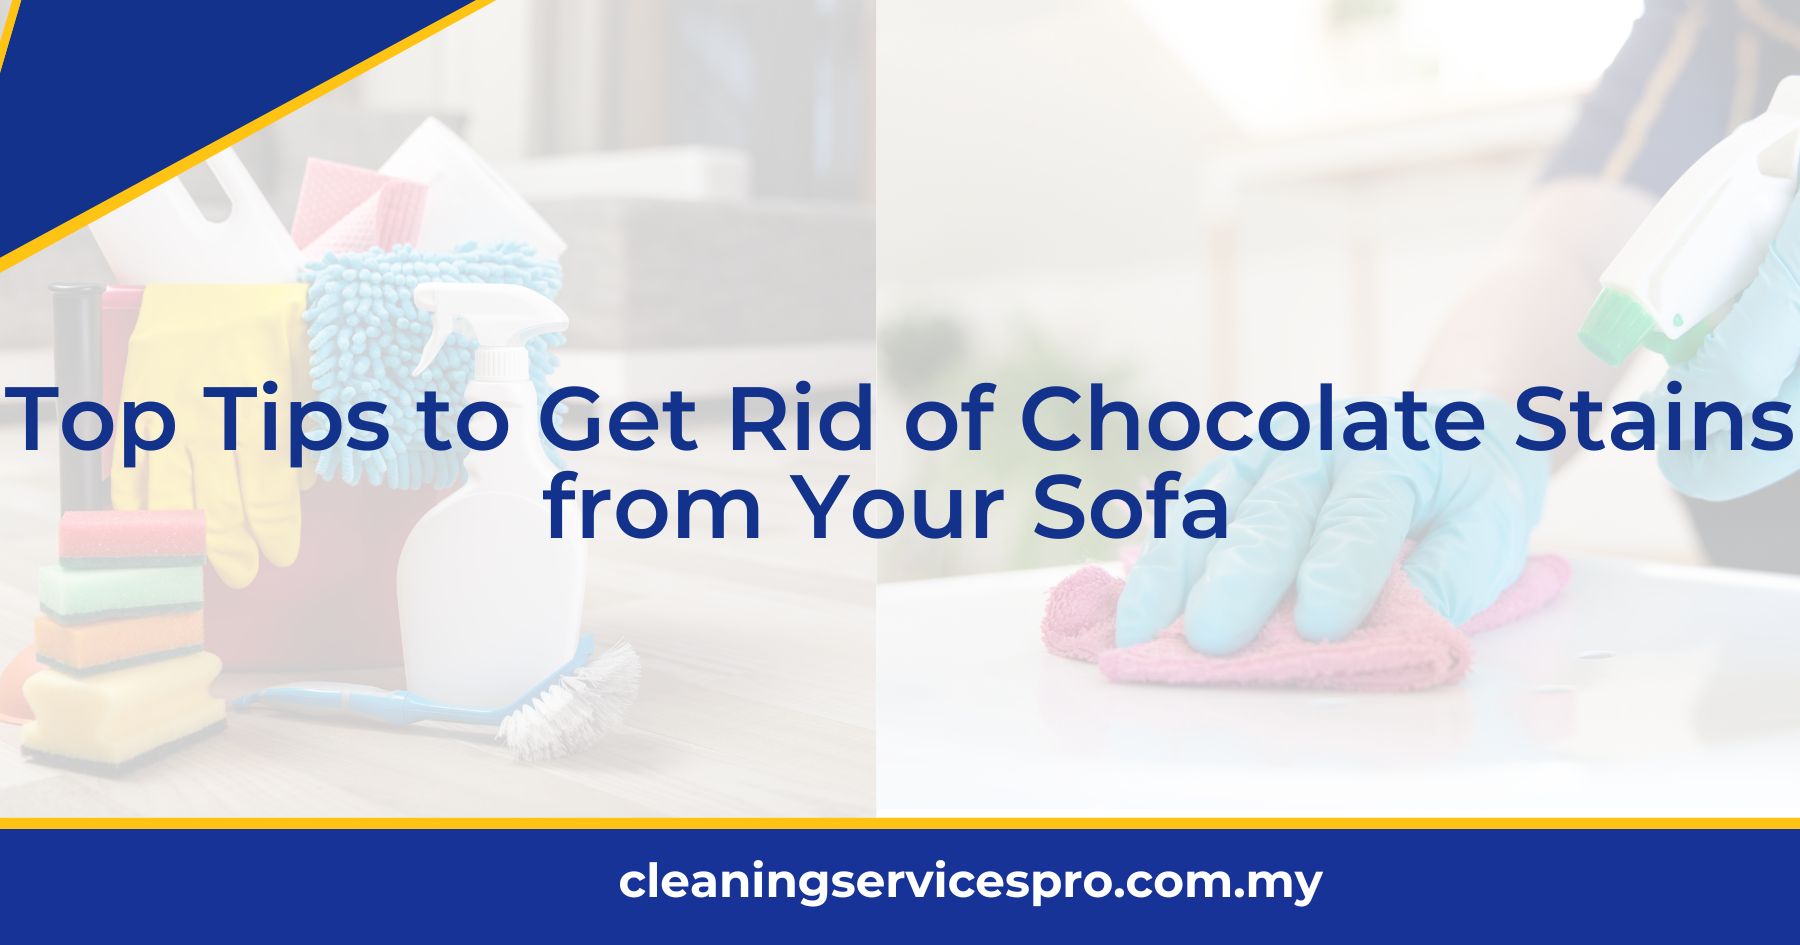 Top Tips to Get Rid of Chocolate Stains from Your Sofa